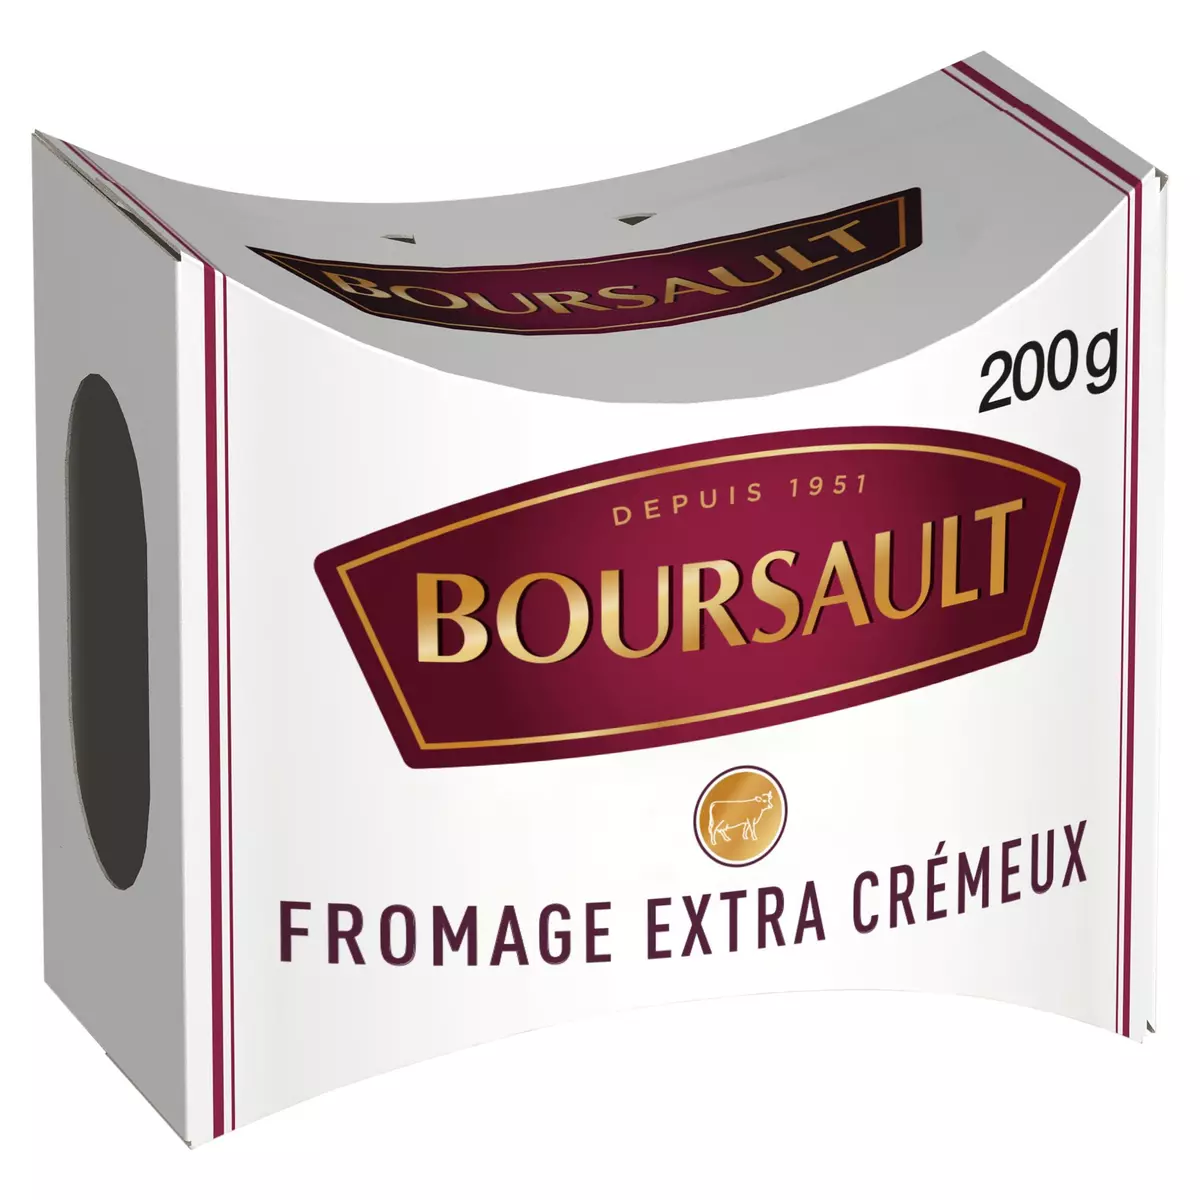 BOURSAULT Fromage extra crémeux 200g